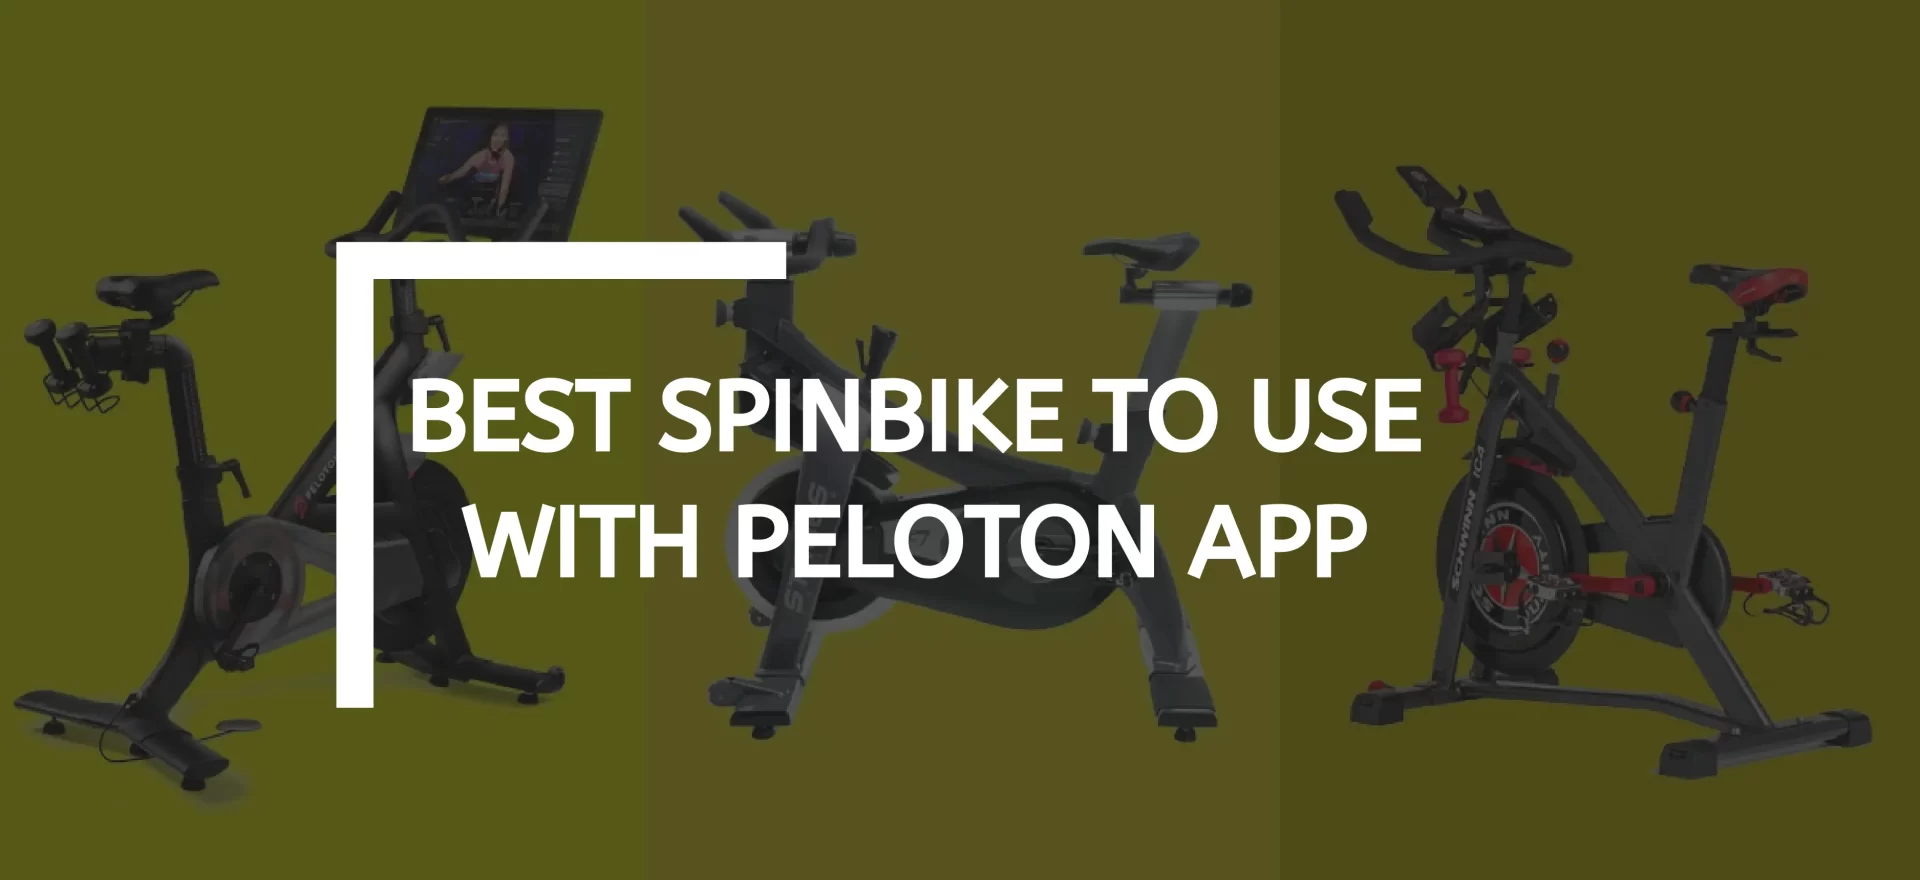 Best Spinbike To Use With Peloton App